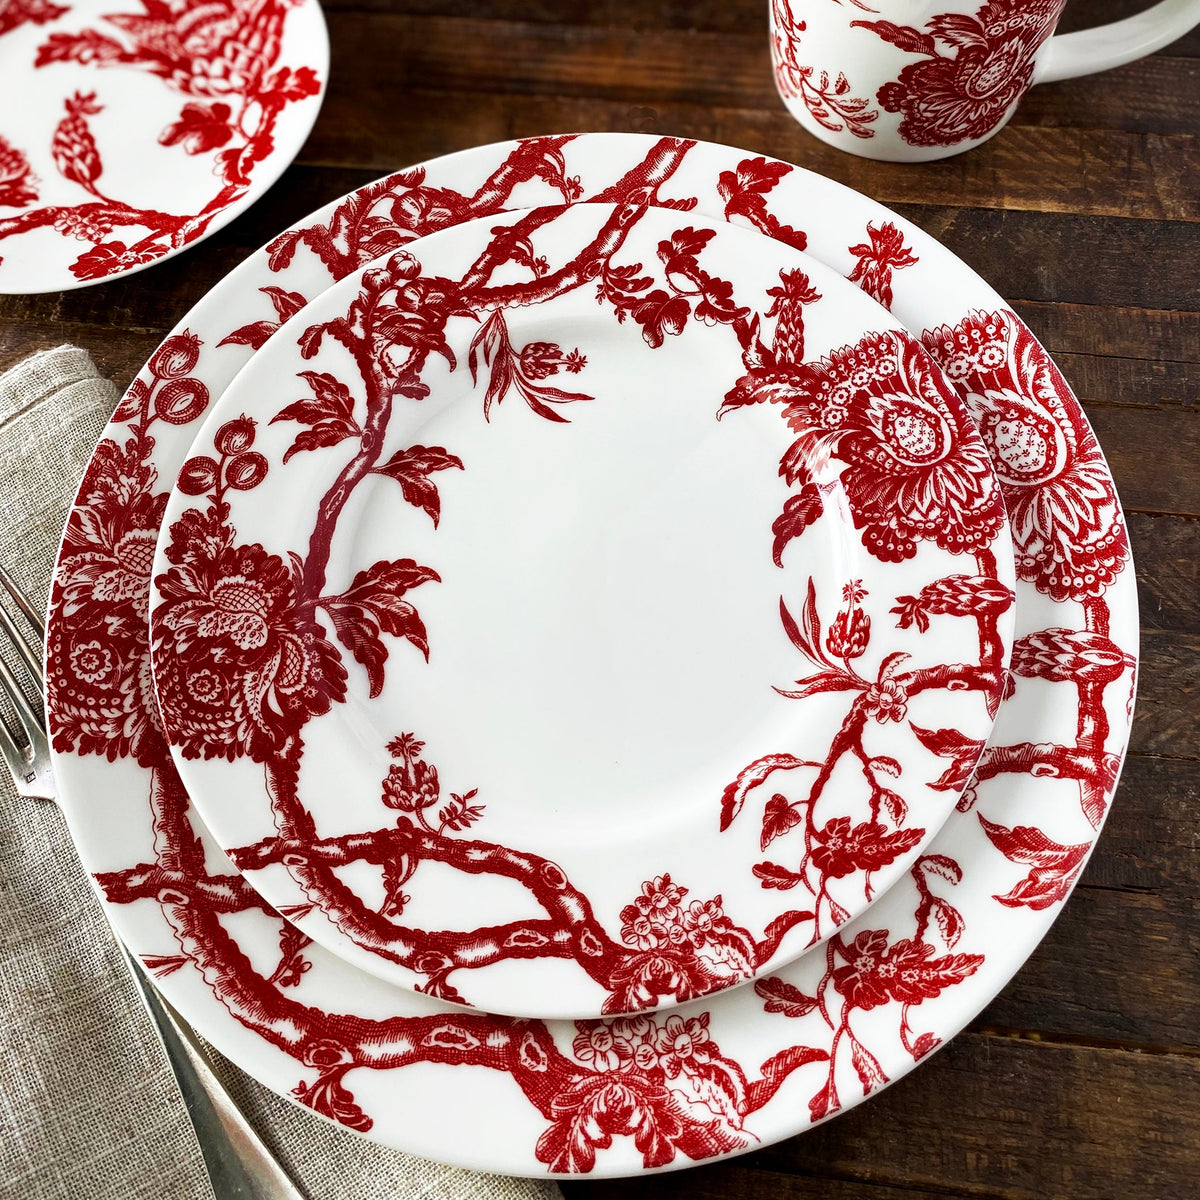 Arcadia Crimson Dinnerware from Caskata includes a dinner, salad, canape and mug shown here on a rustic tabletop.